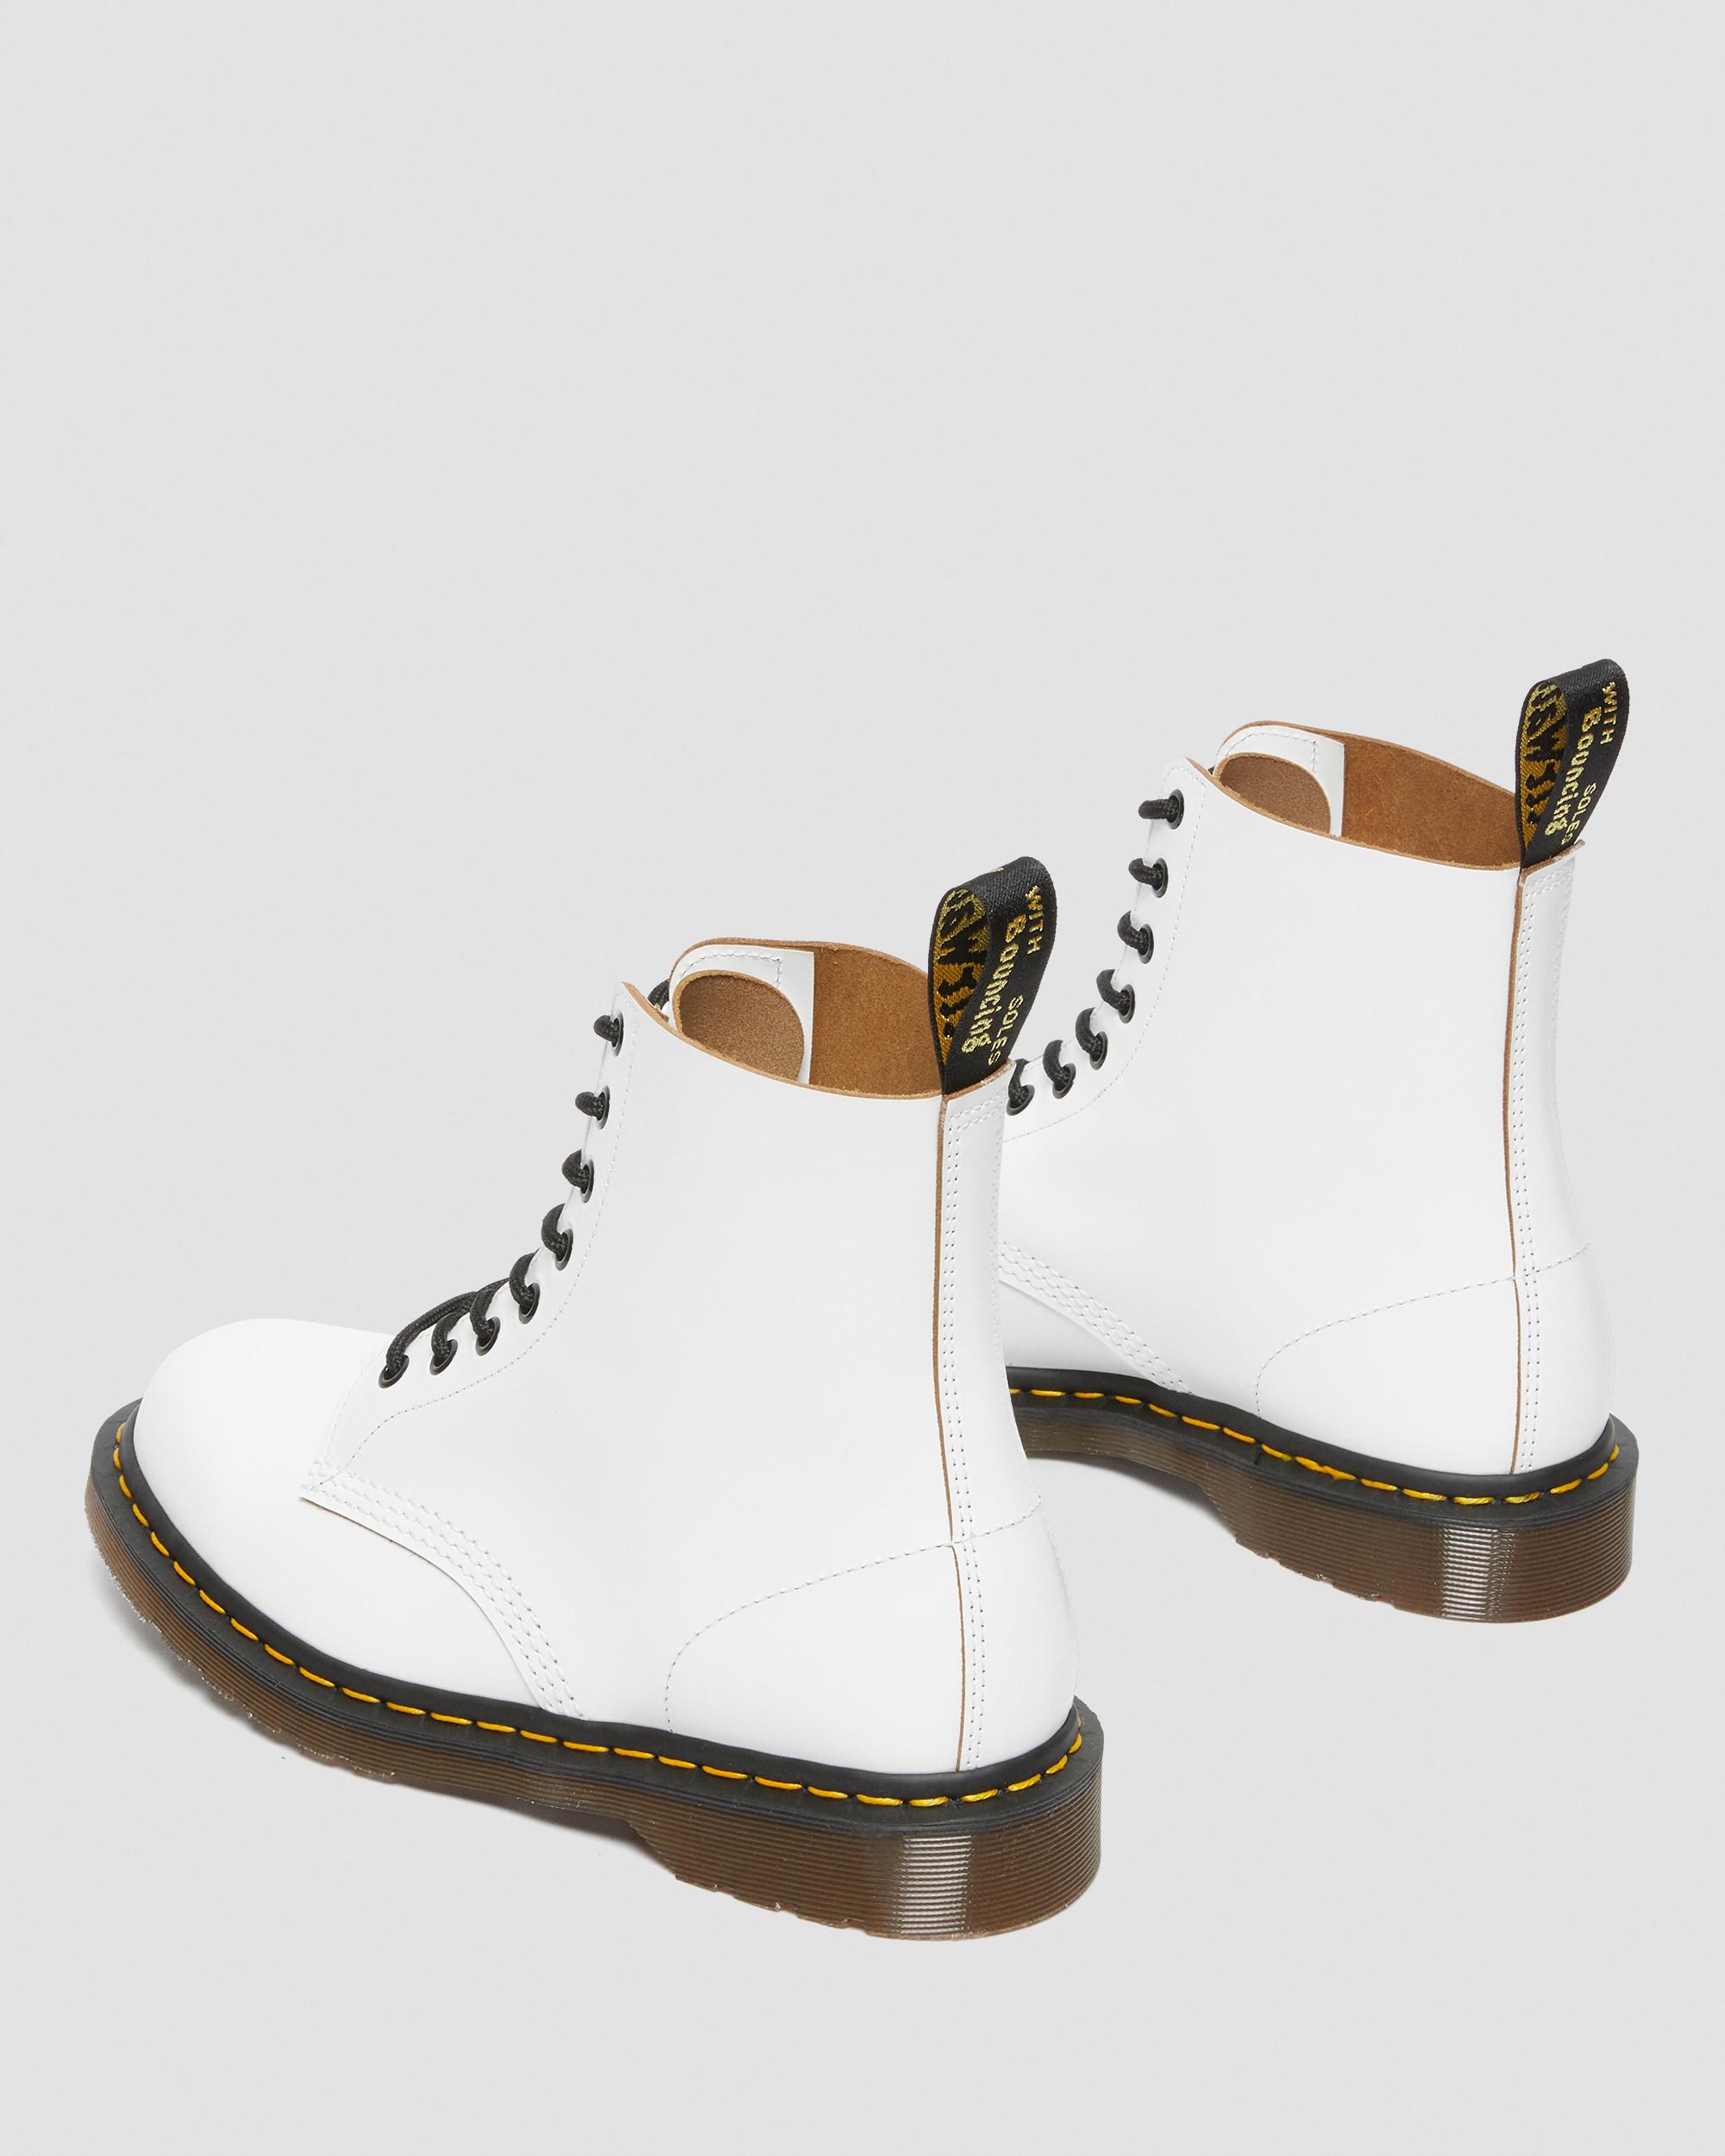 Dr. Martens, 1460 Vintage Made in England Lace Up Boots in White, Size 14